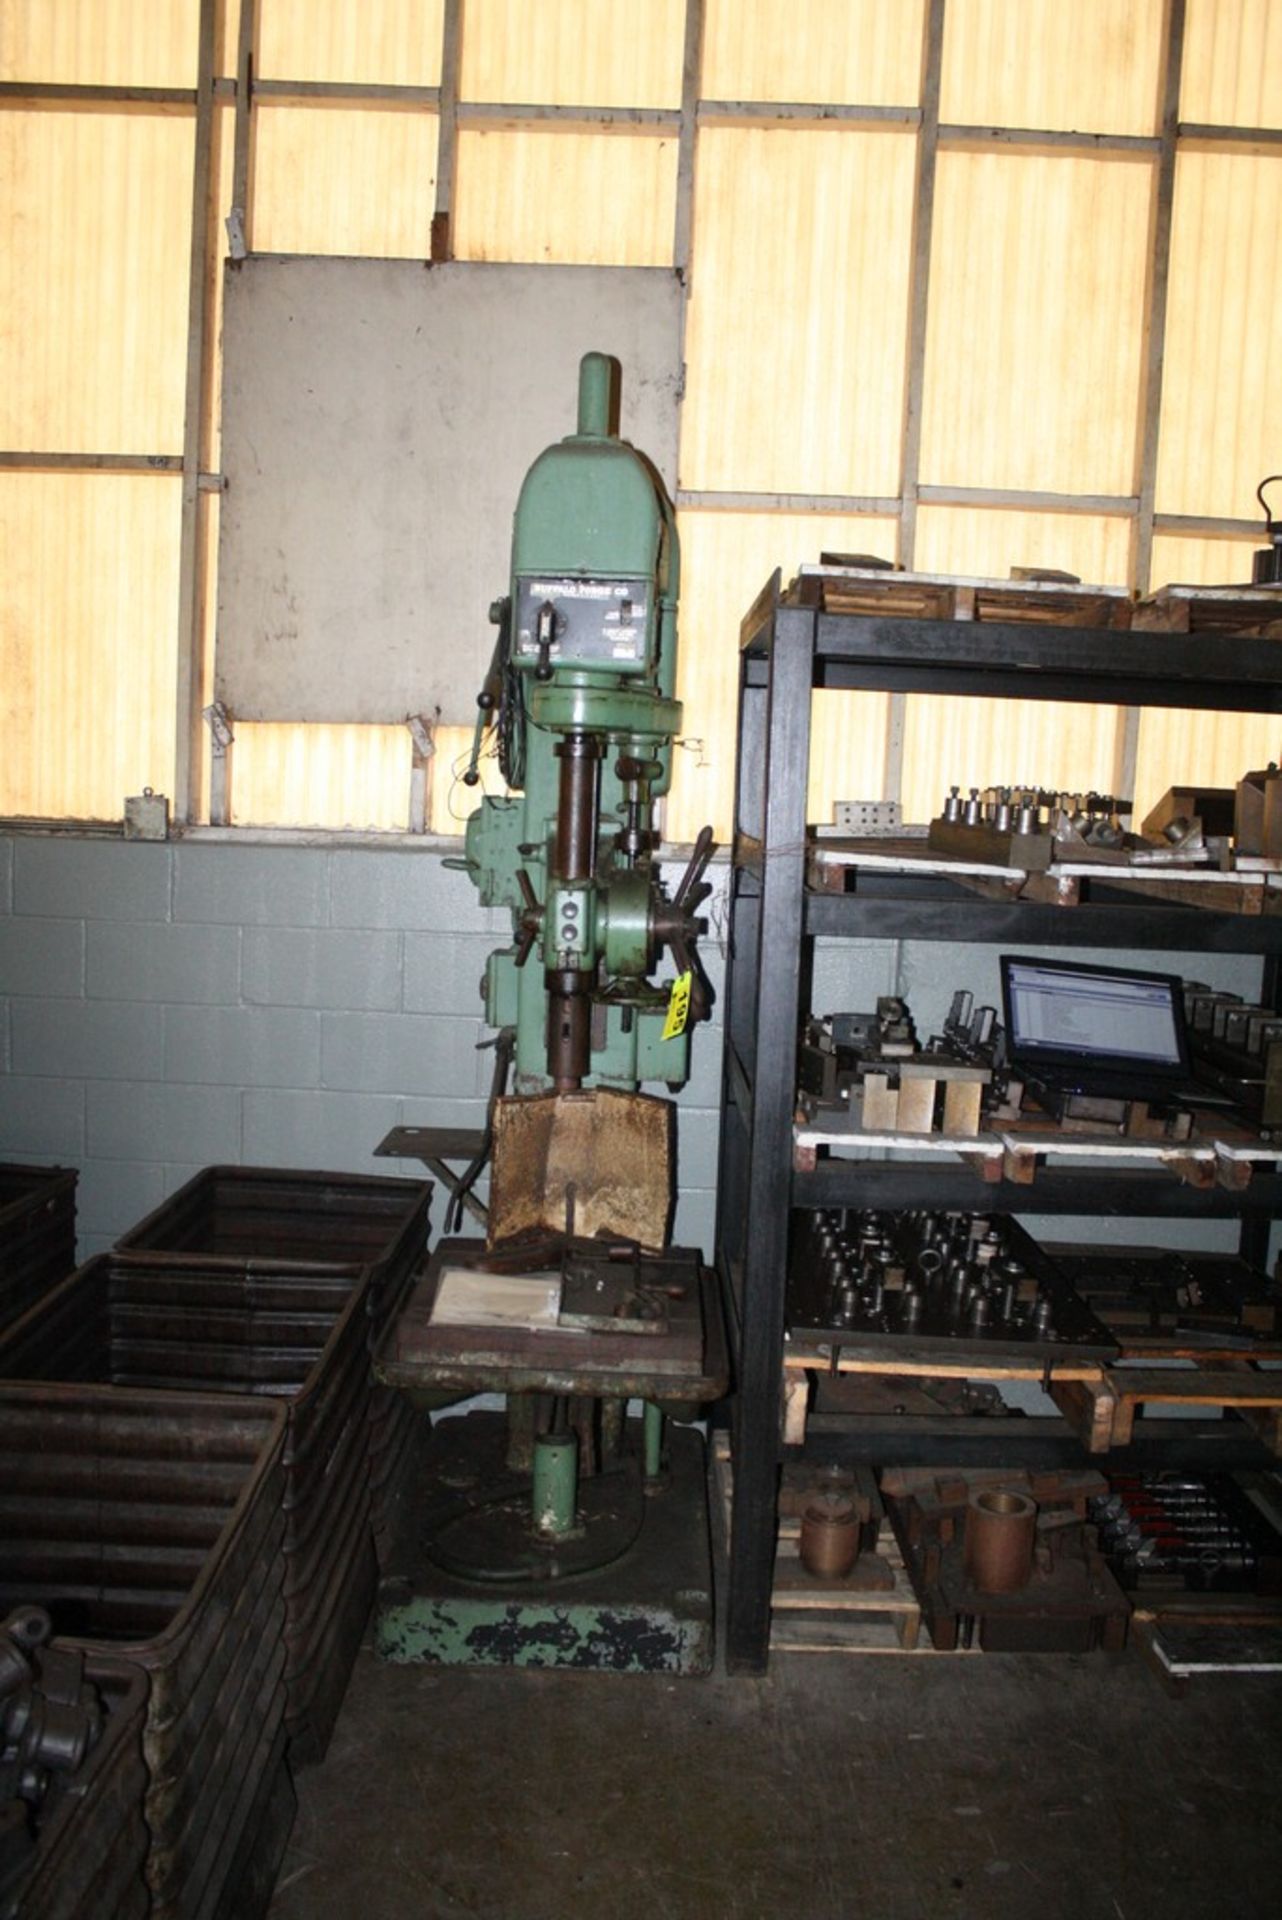 BUFFALO FORGE 26" PRODUCTION DRILL PRESS WITH POWER FEED S/N 62-875